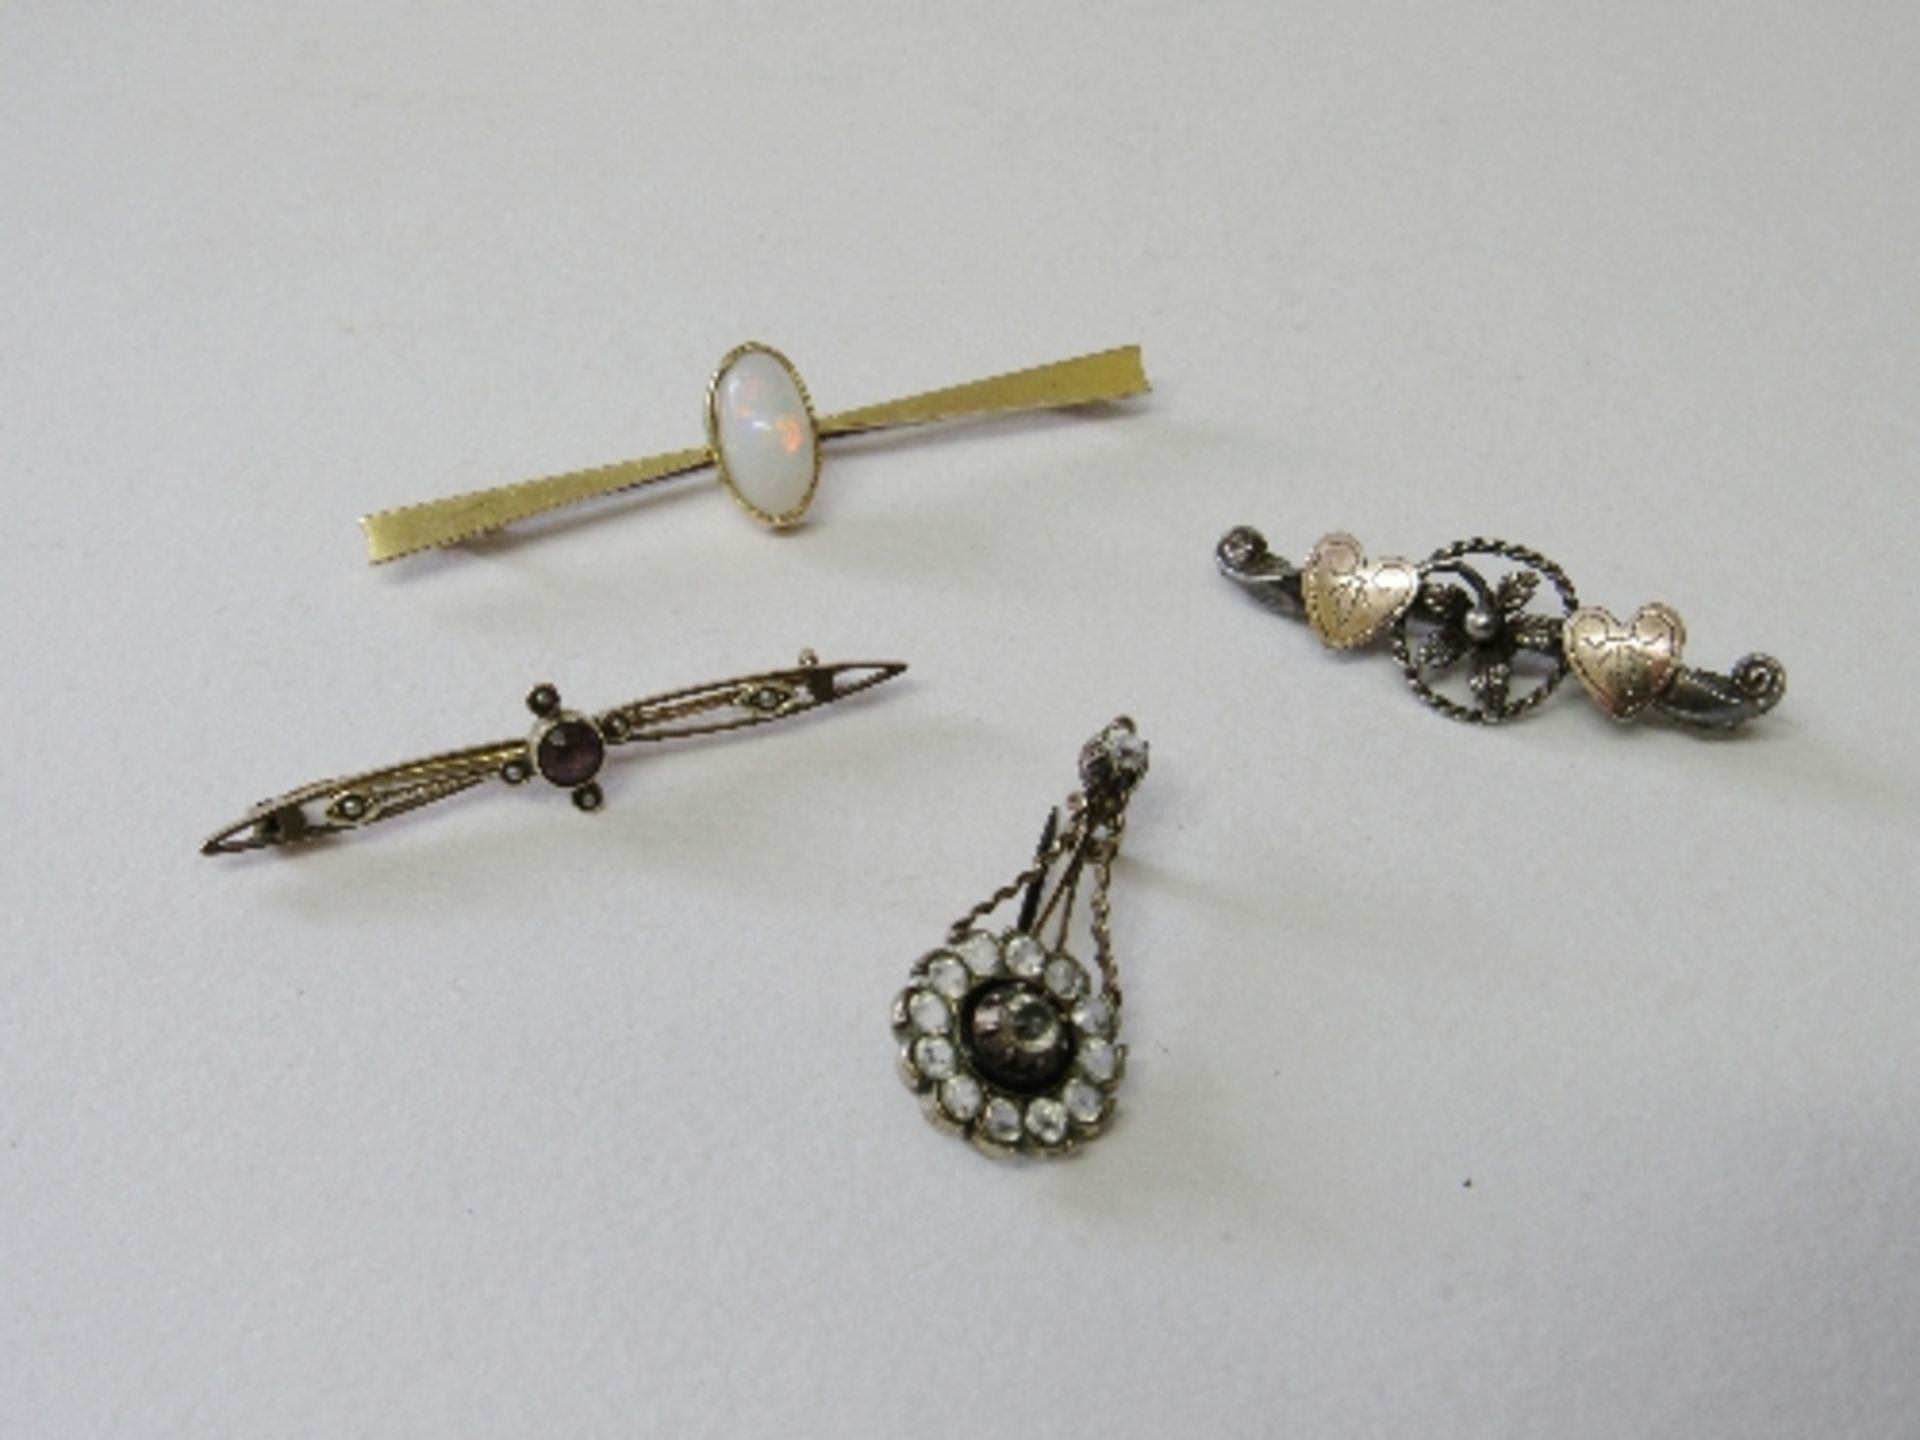 9ct gold & opal tie pin, silver brooch mounted with 2 hearts & central floret, gold coloured tie pin